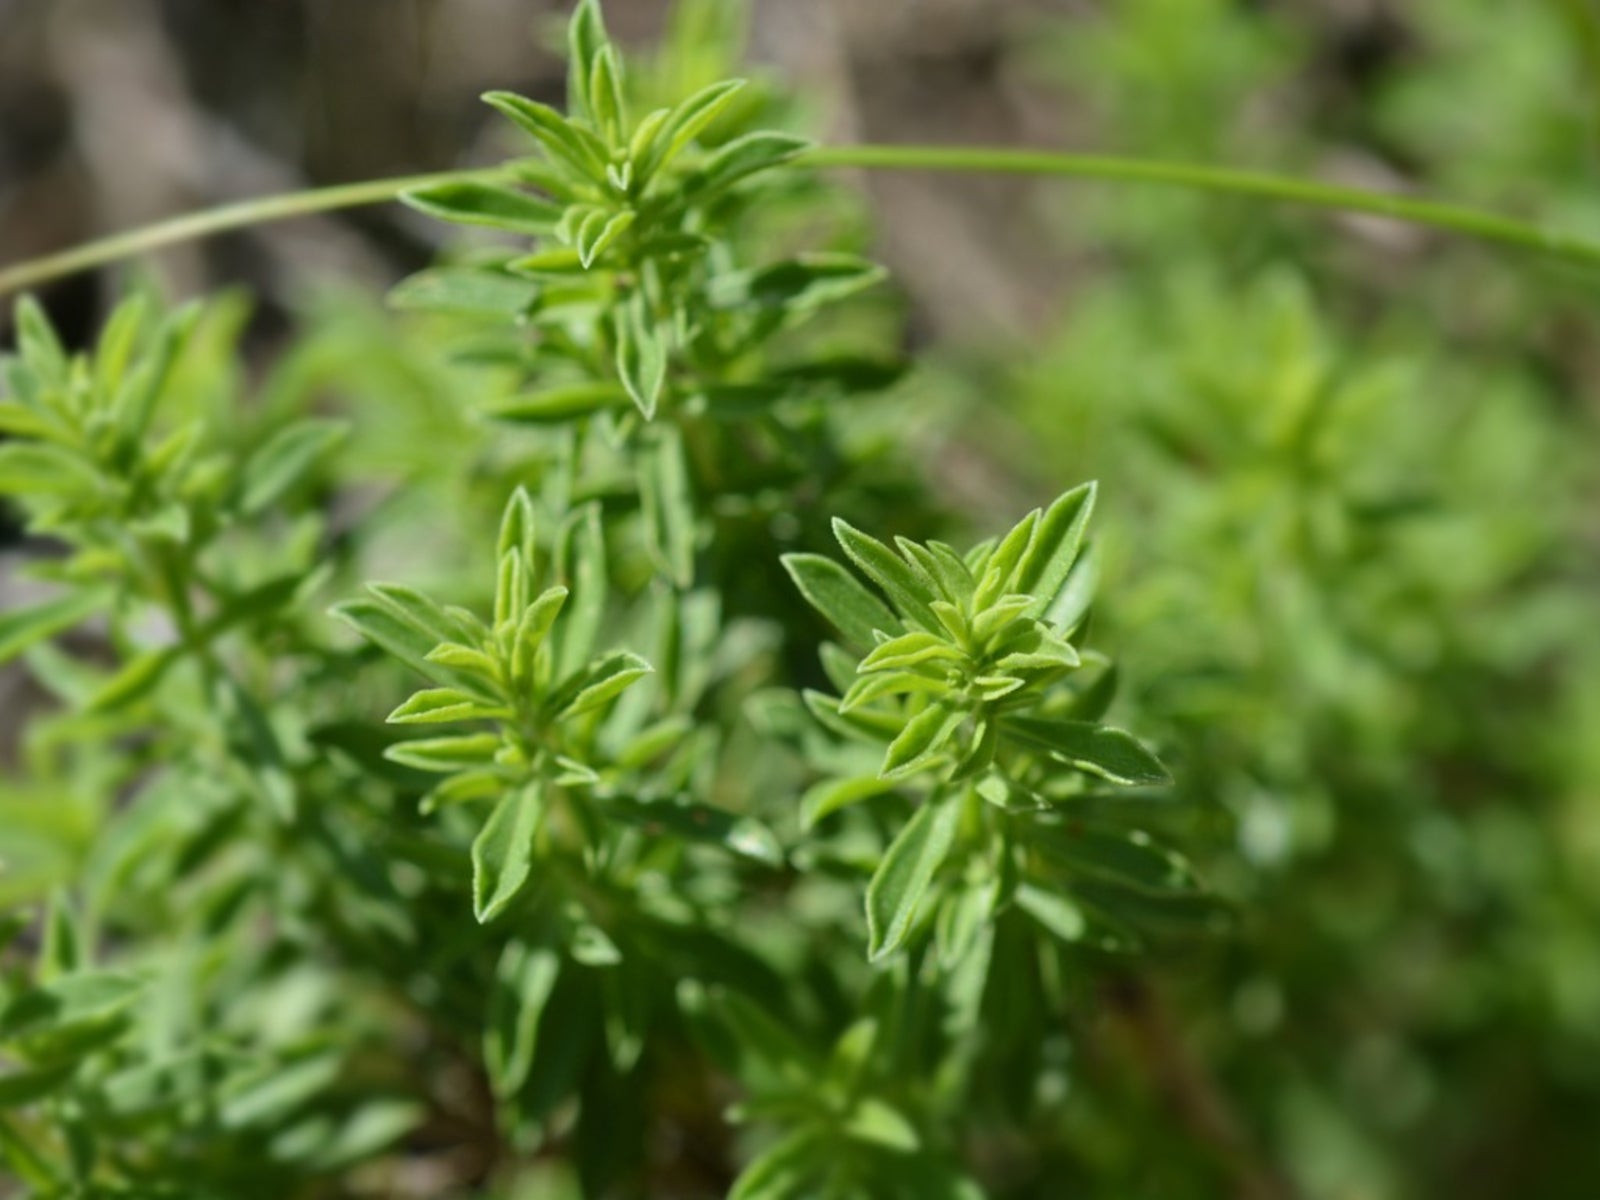 Image of Winter savory and thyme herbs grow together